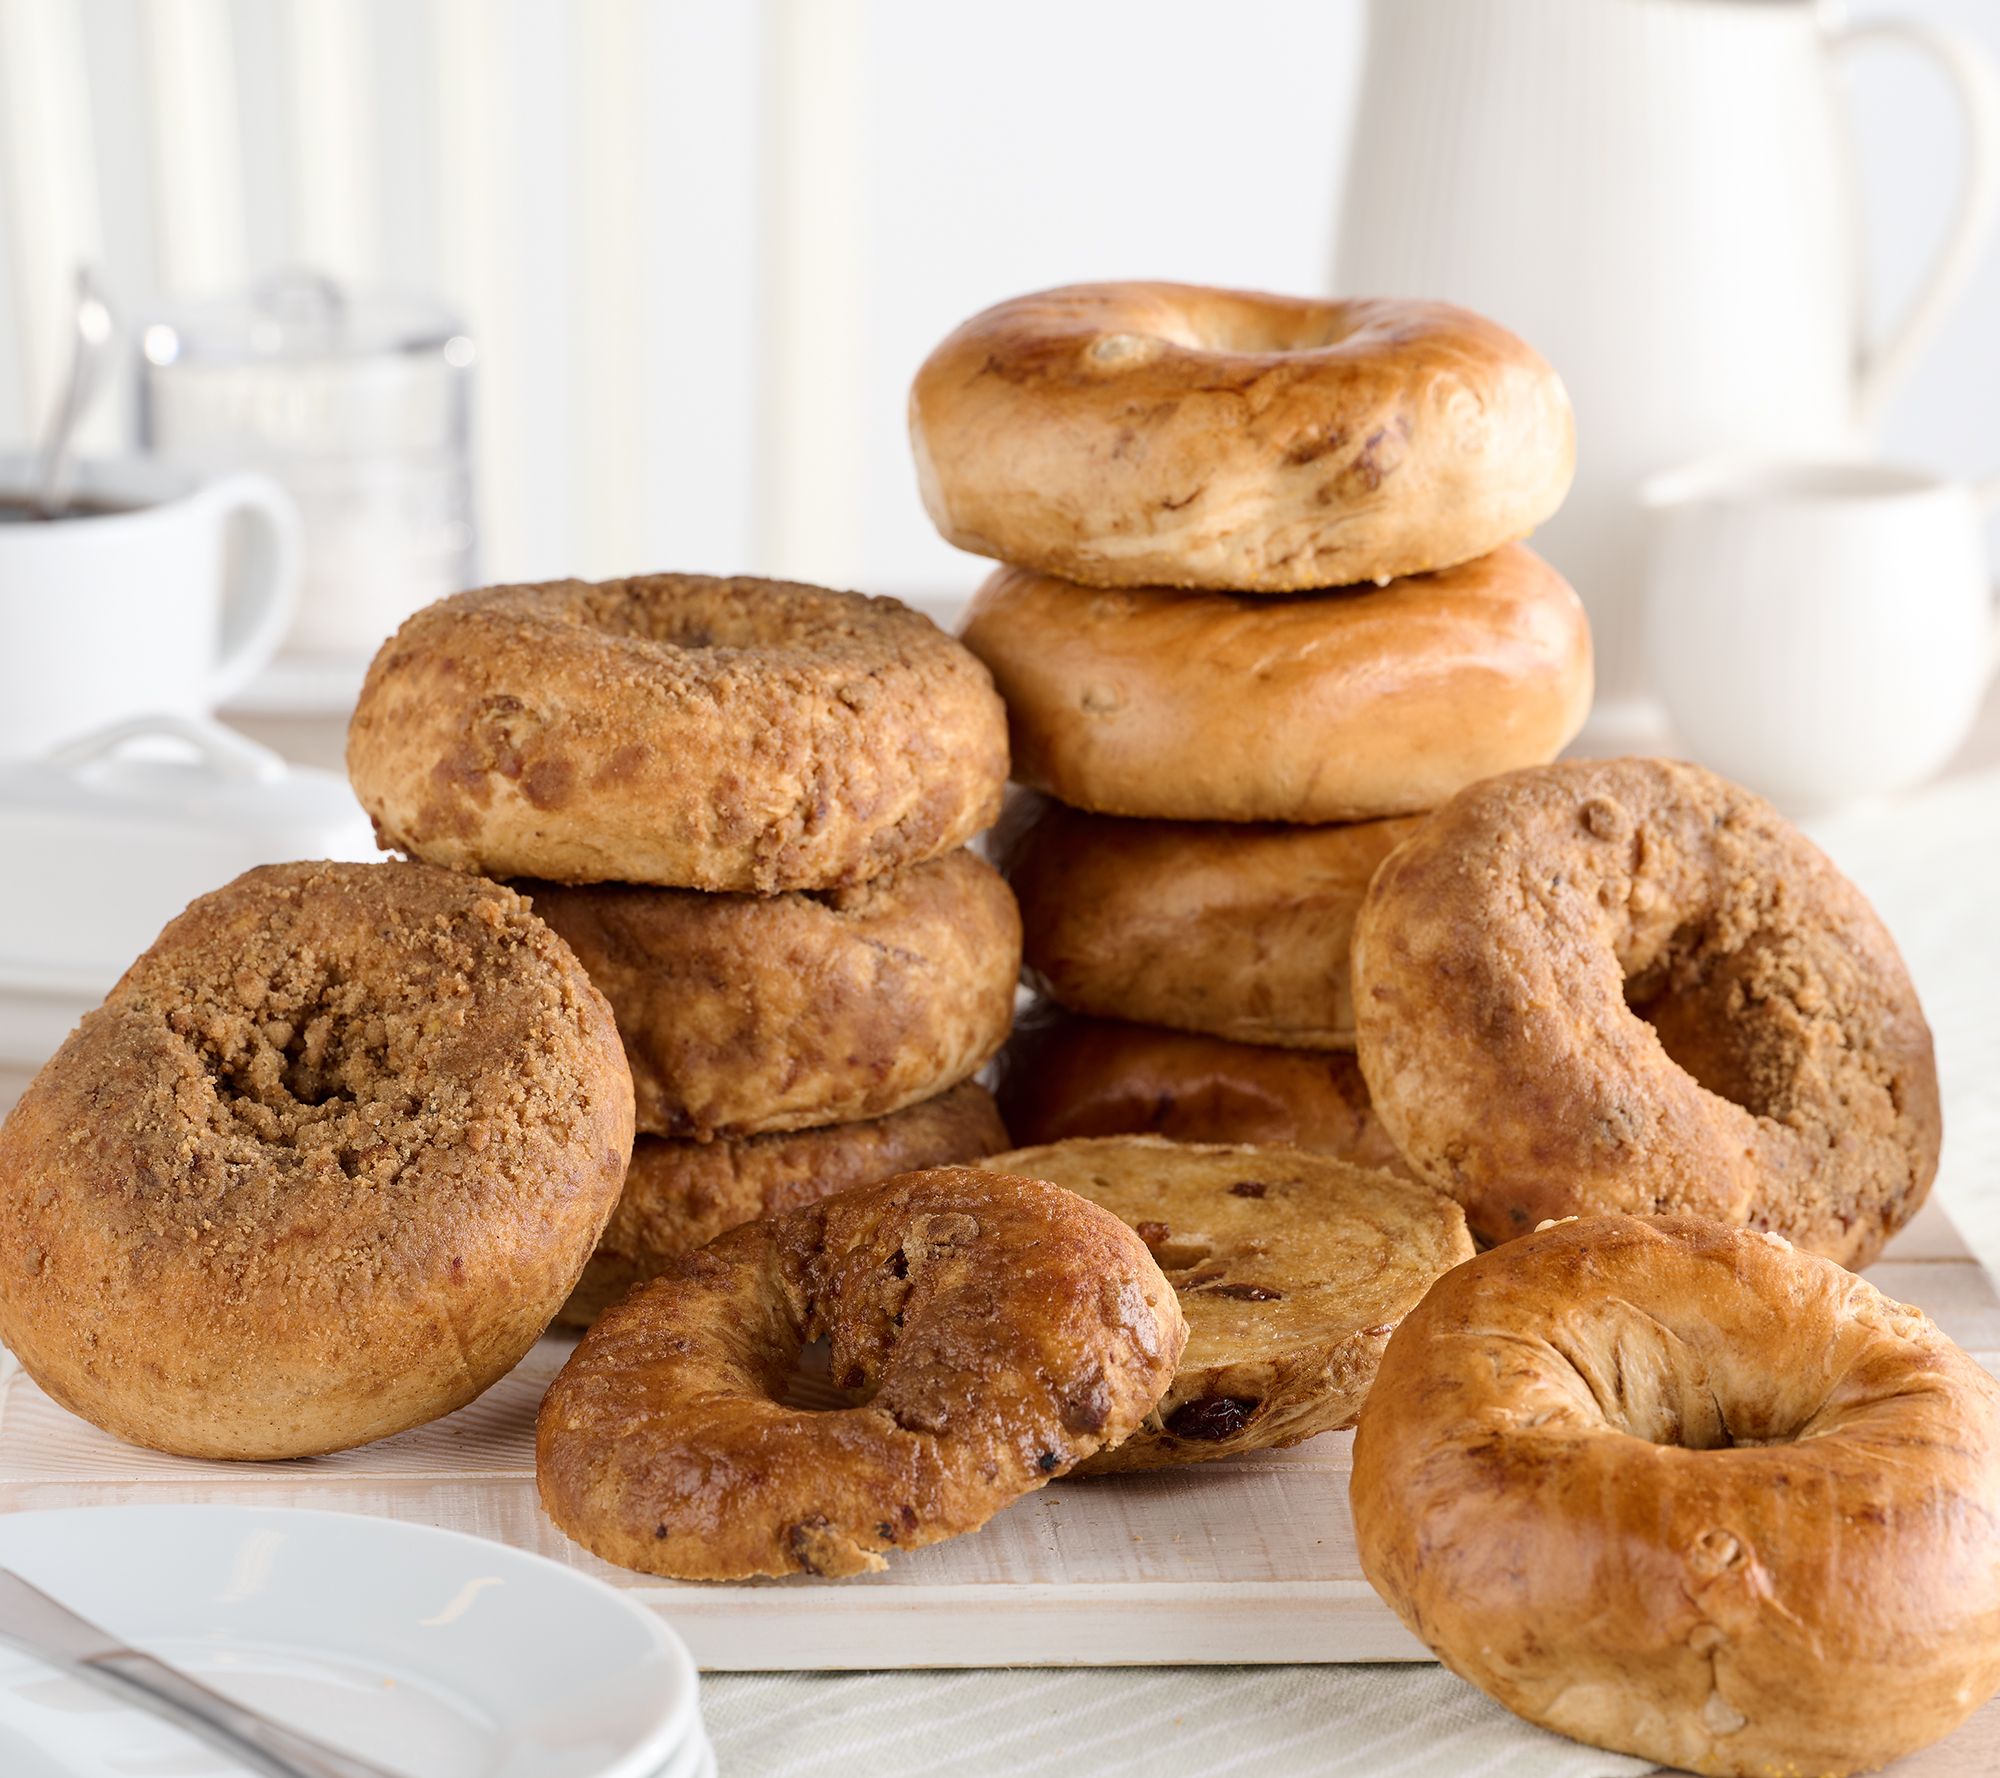 Just Bagels (24) 4-oz NYC Kettle Boiled Bagels in Flavor Choice - QVC.com